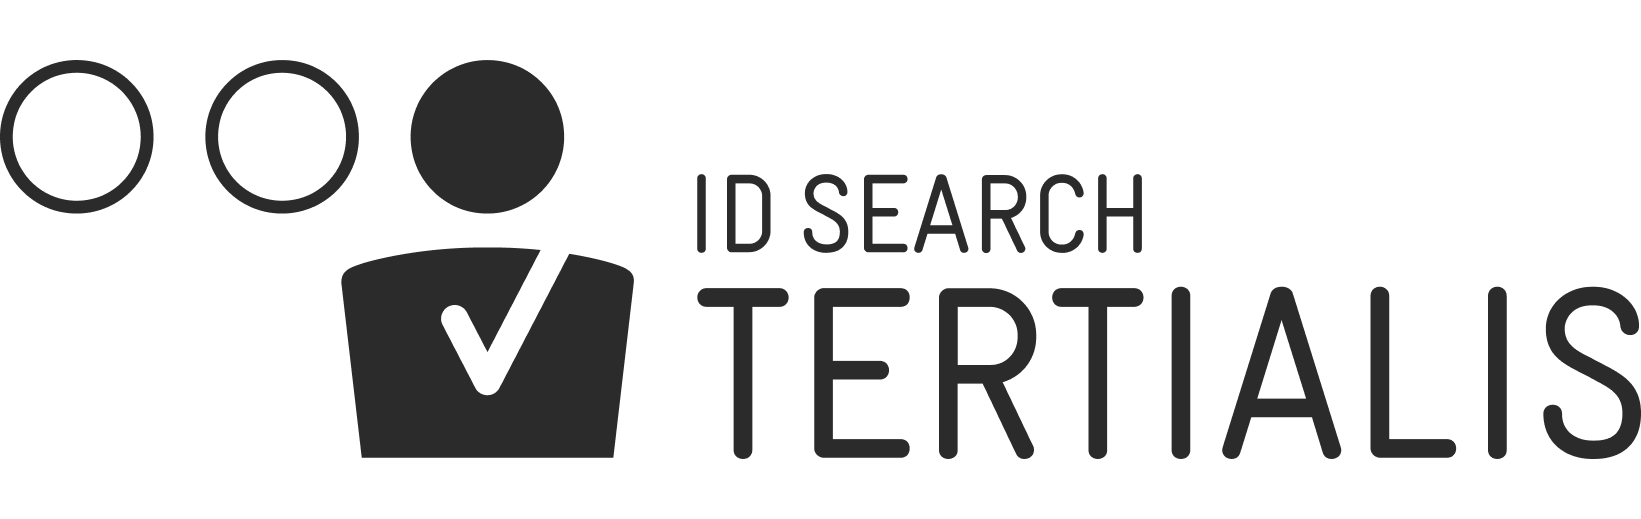 IDSEARCH